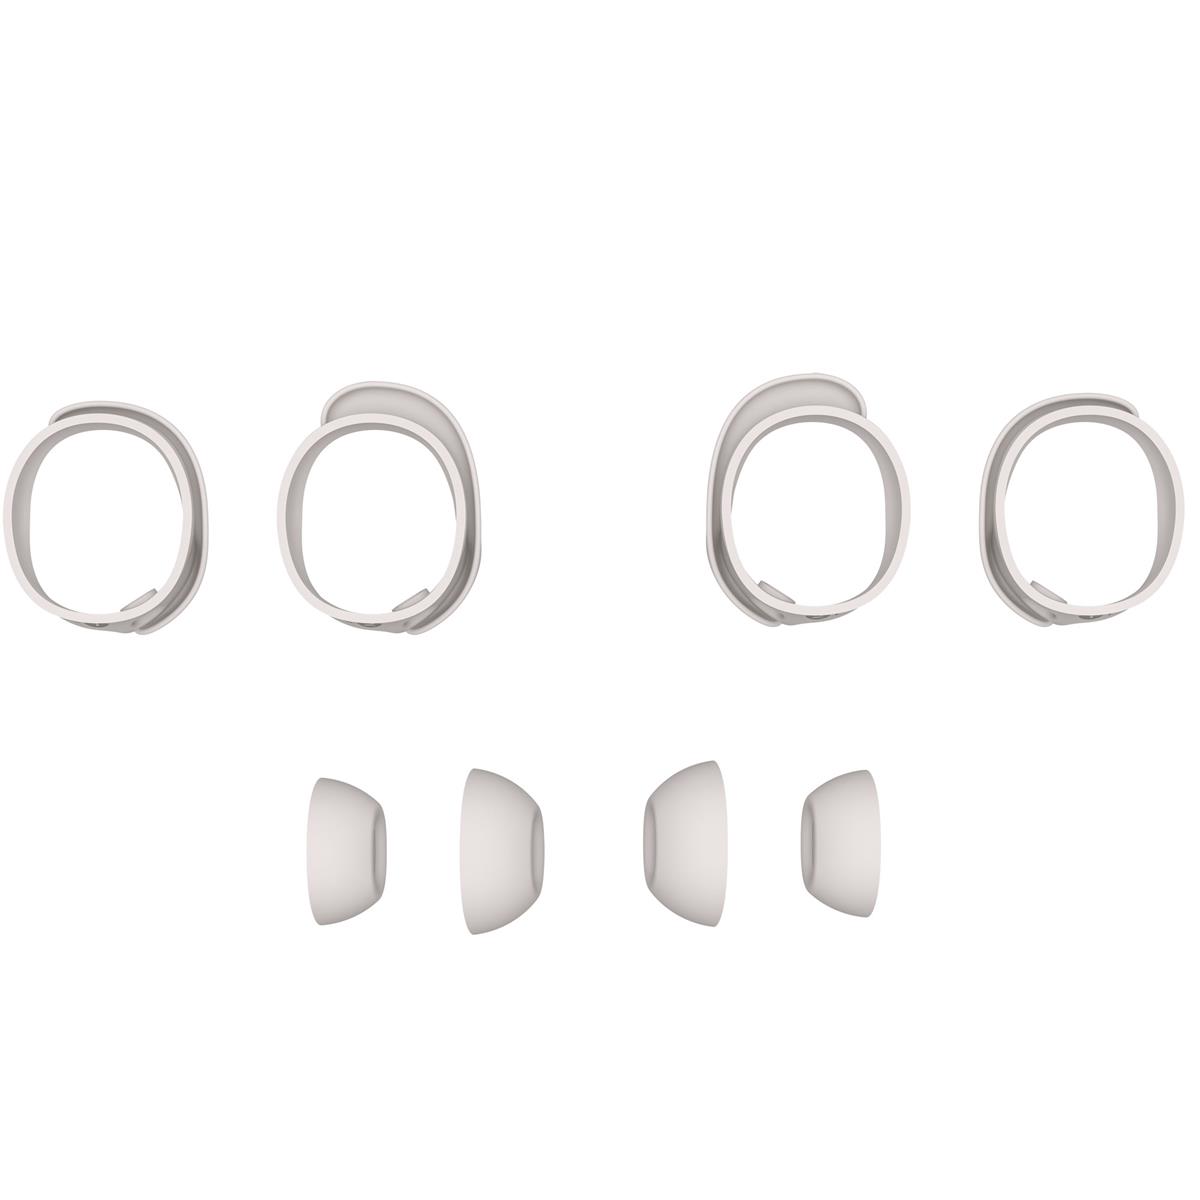 Image of Bose Alternate Sizing Kit for QuietComfort Earbuds II